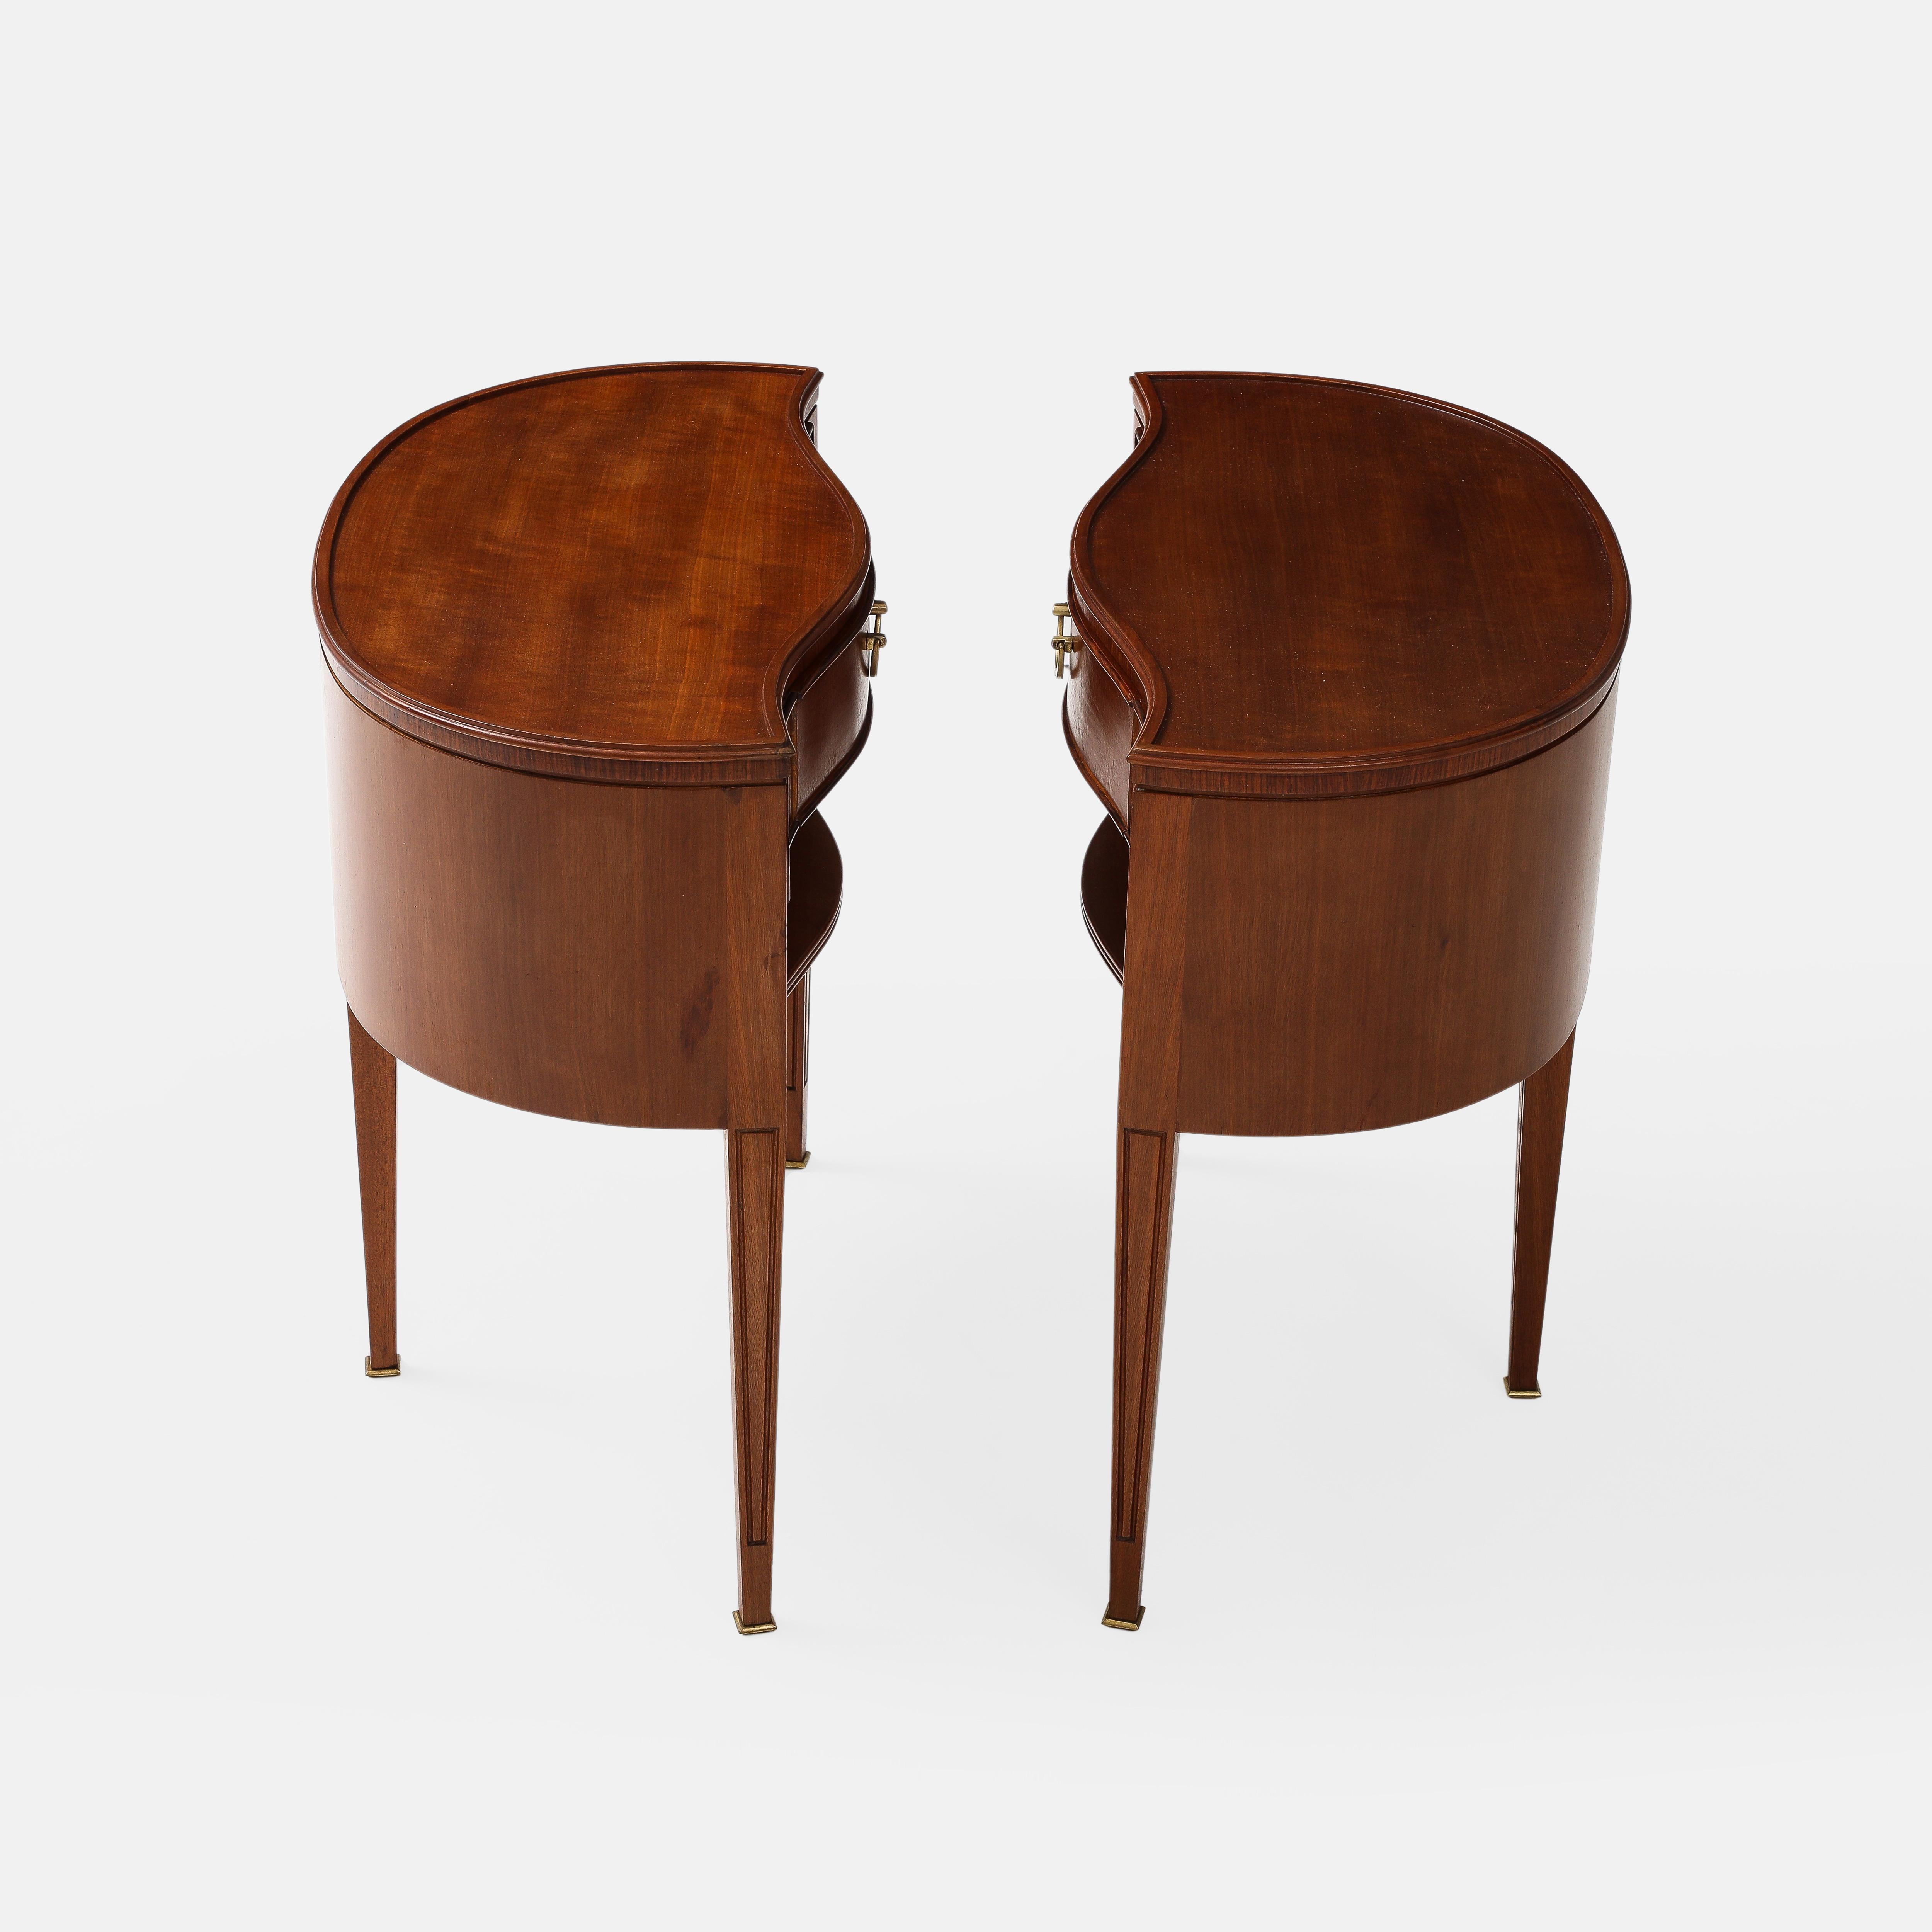 Mid-20th Century 1950s Paolo Buffa Pair of Mahogany Nightstands or Bedside Tables For Sale